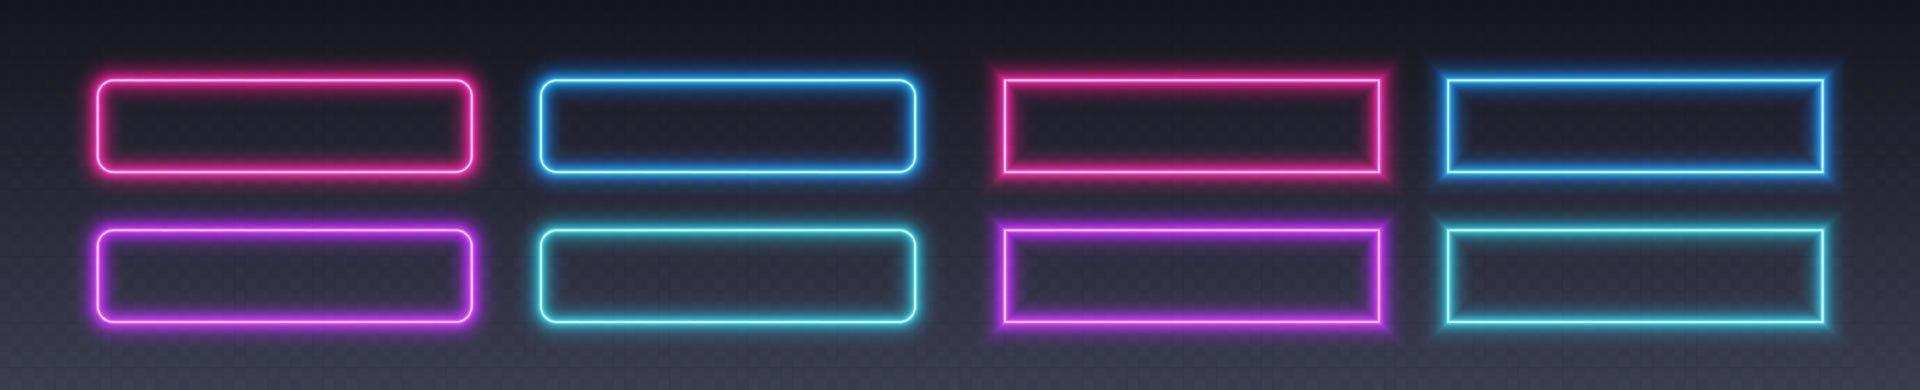 Neon button frames, coloful glowing borders, isolated UI elements. vector